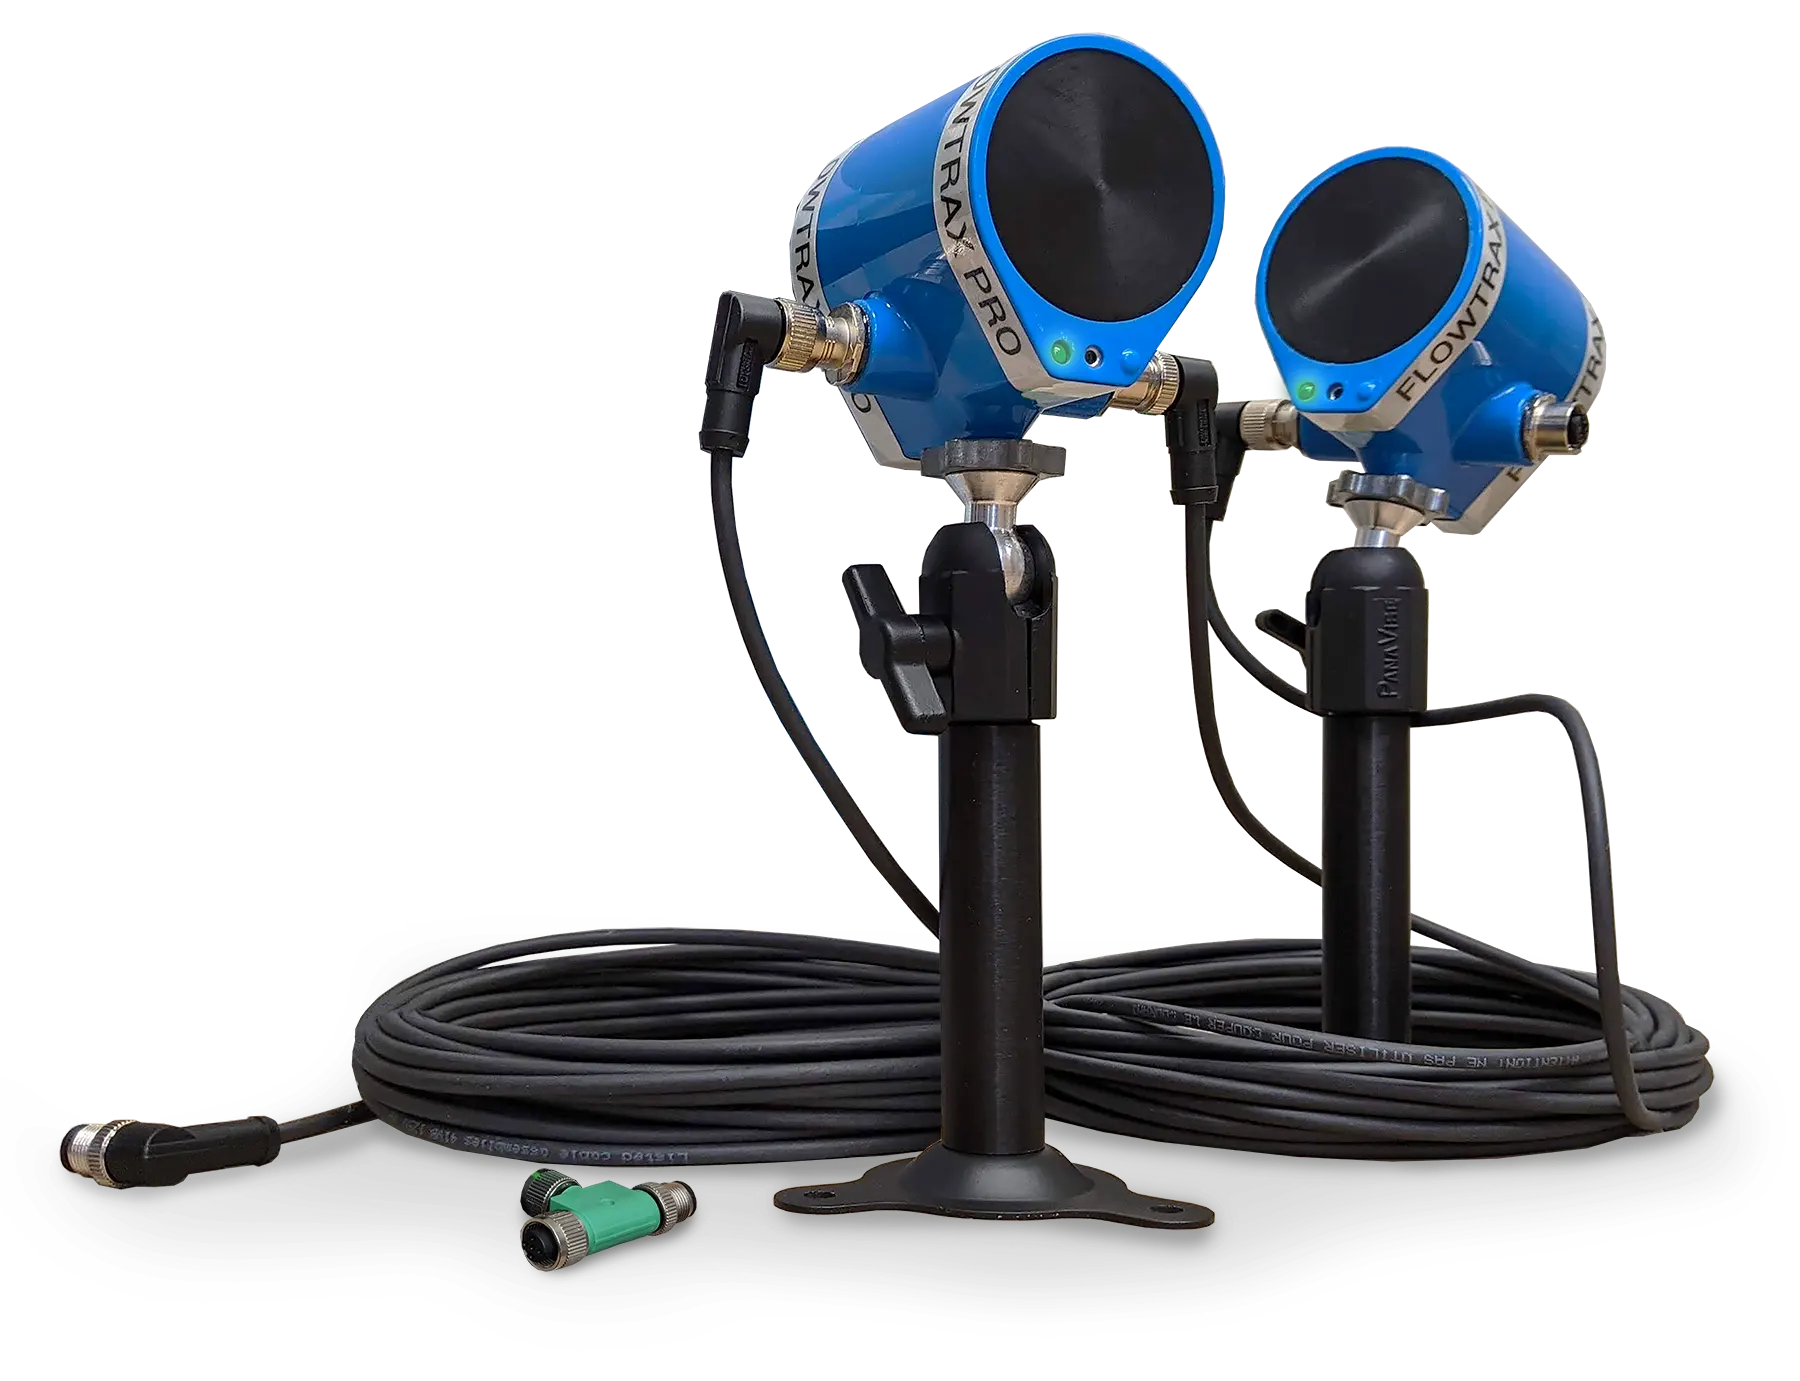 Pro Series ultrasonic Sensors and cables